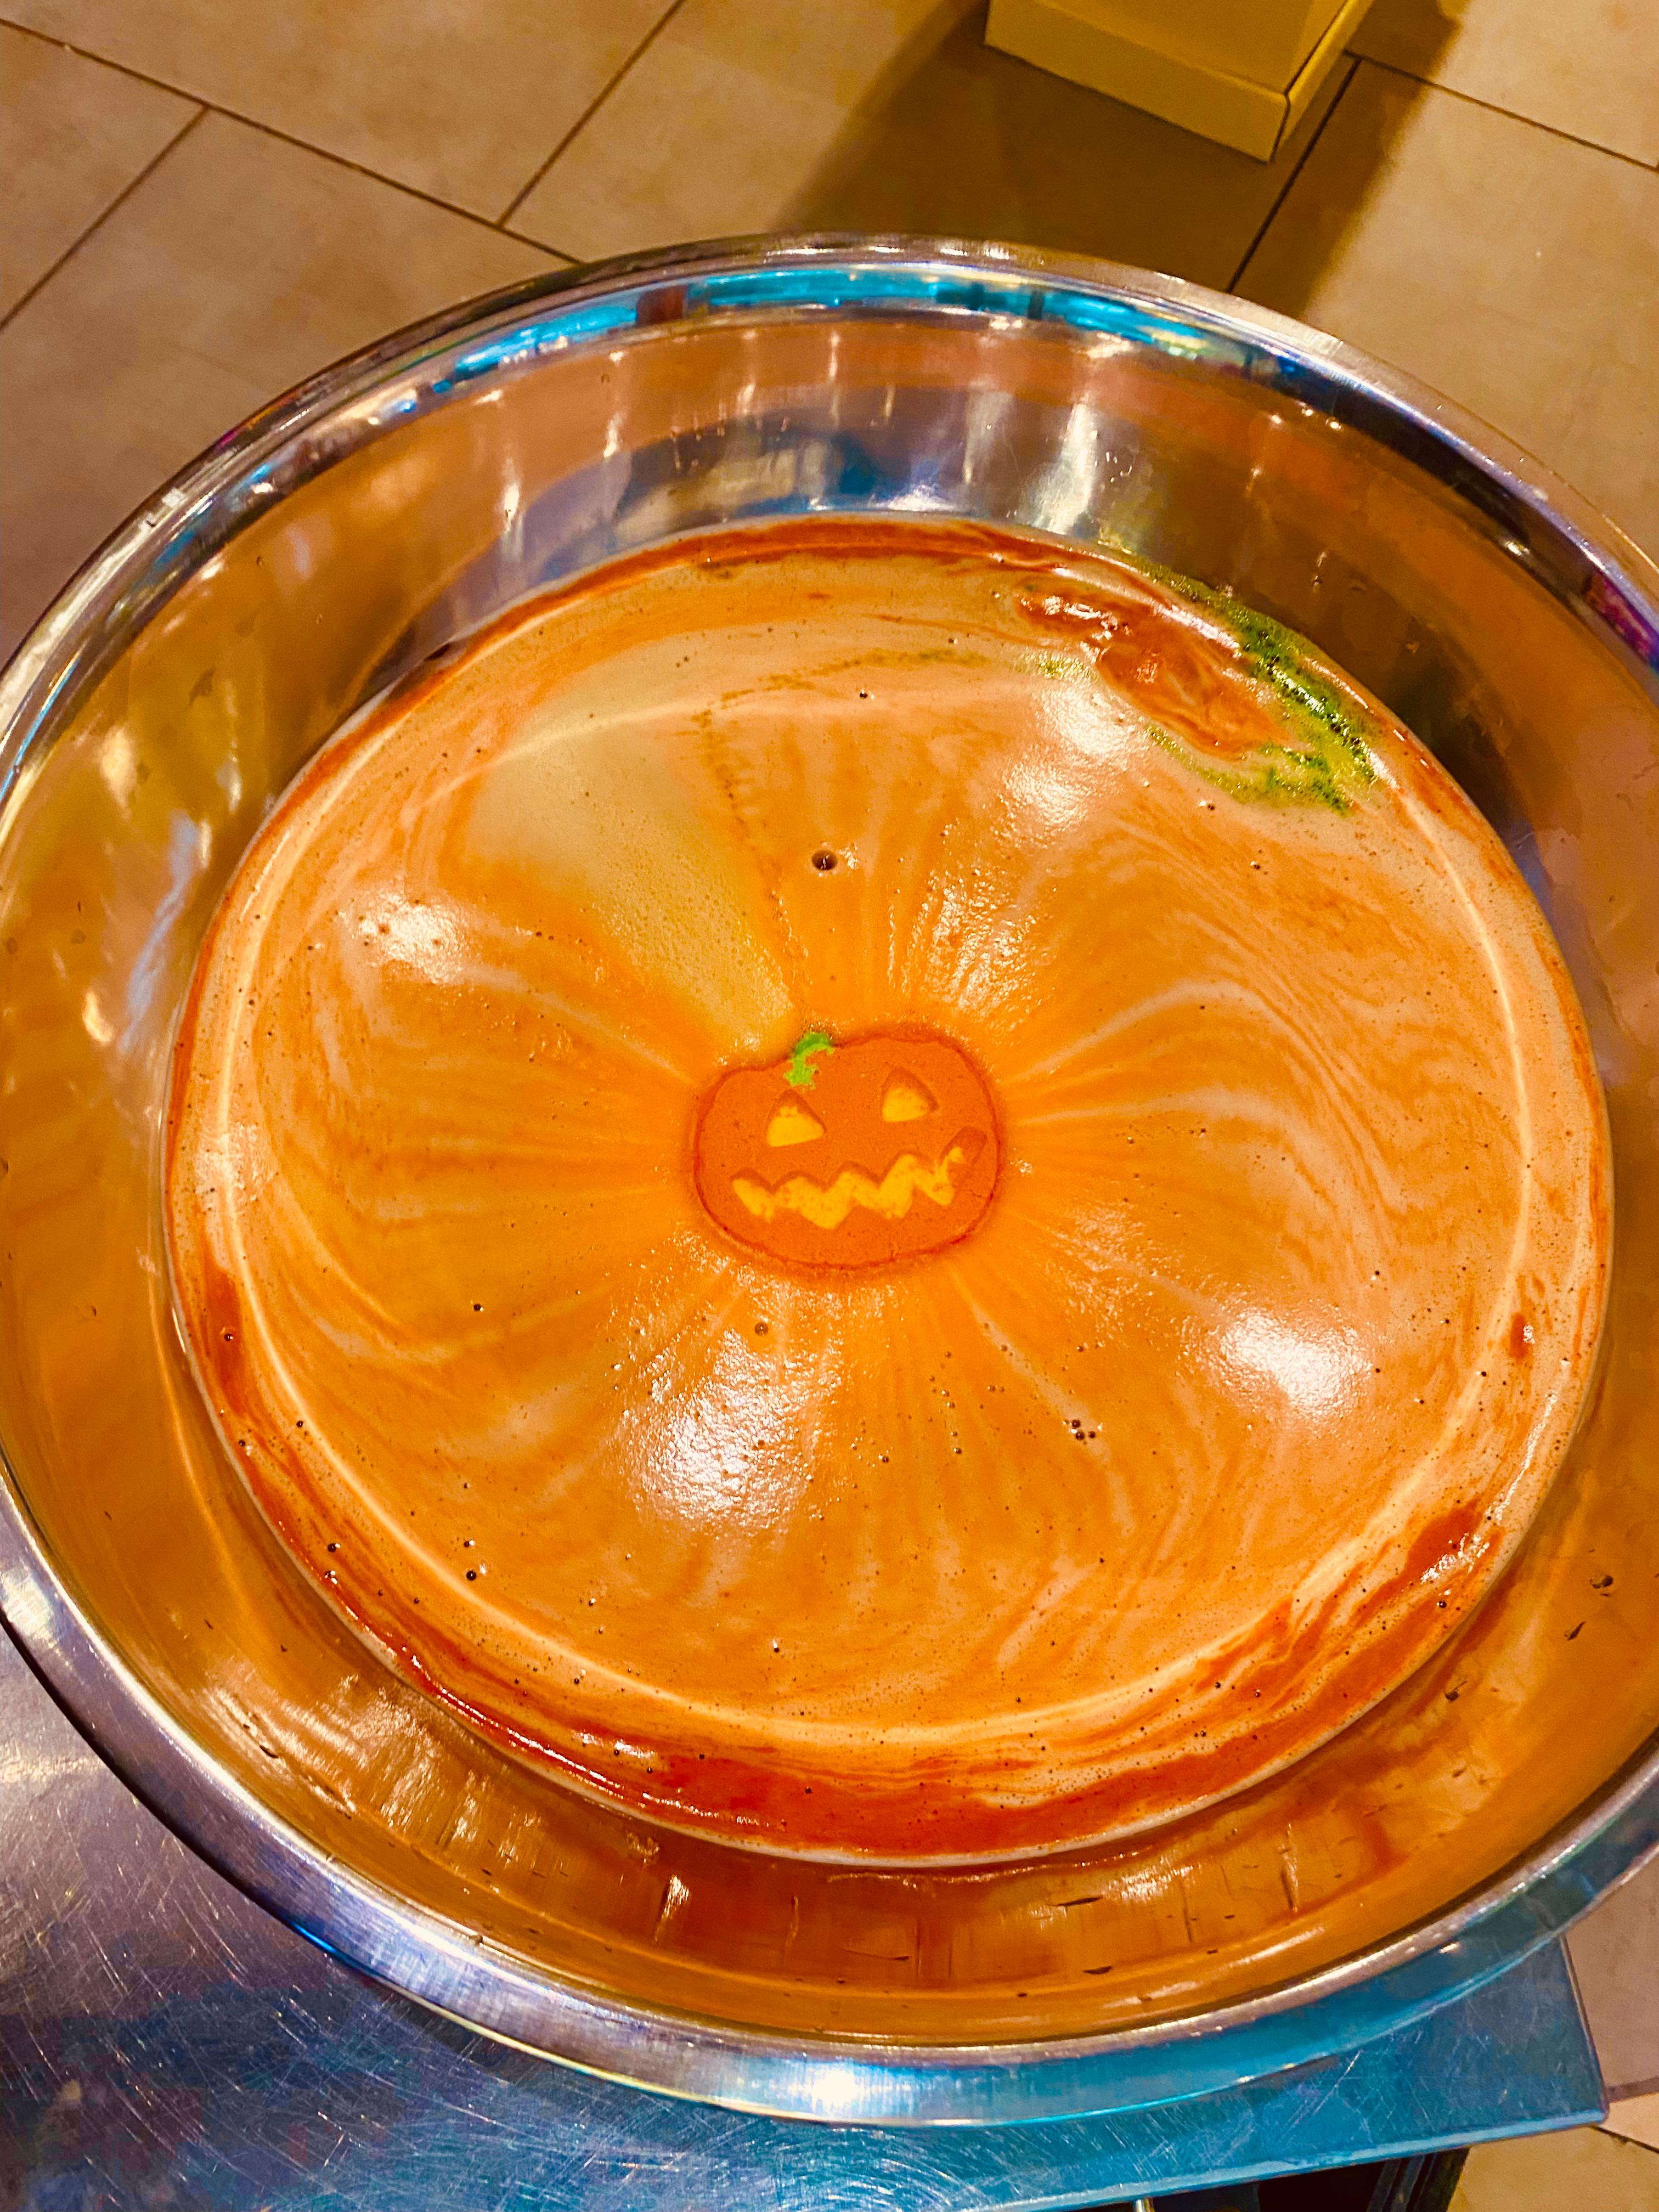 Carve out some me-time with the eerily soothing effects of pumpkin powder and fragrant cinnamon leaf oil. Create a jack-o-lovely bathtime brew with brightly-colored hues for a warming soak with a citrusy kick that’ll make any day feel like a treat. And although this is one pumpkin that doesn't light up, we promise it's still lit.